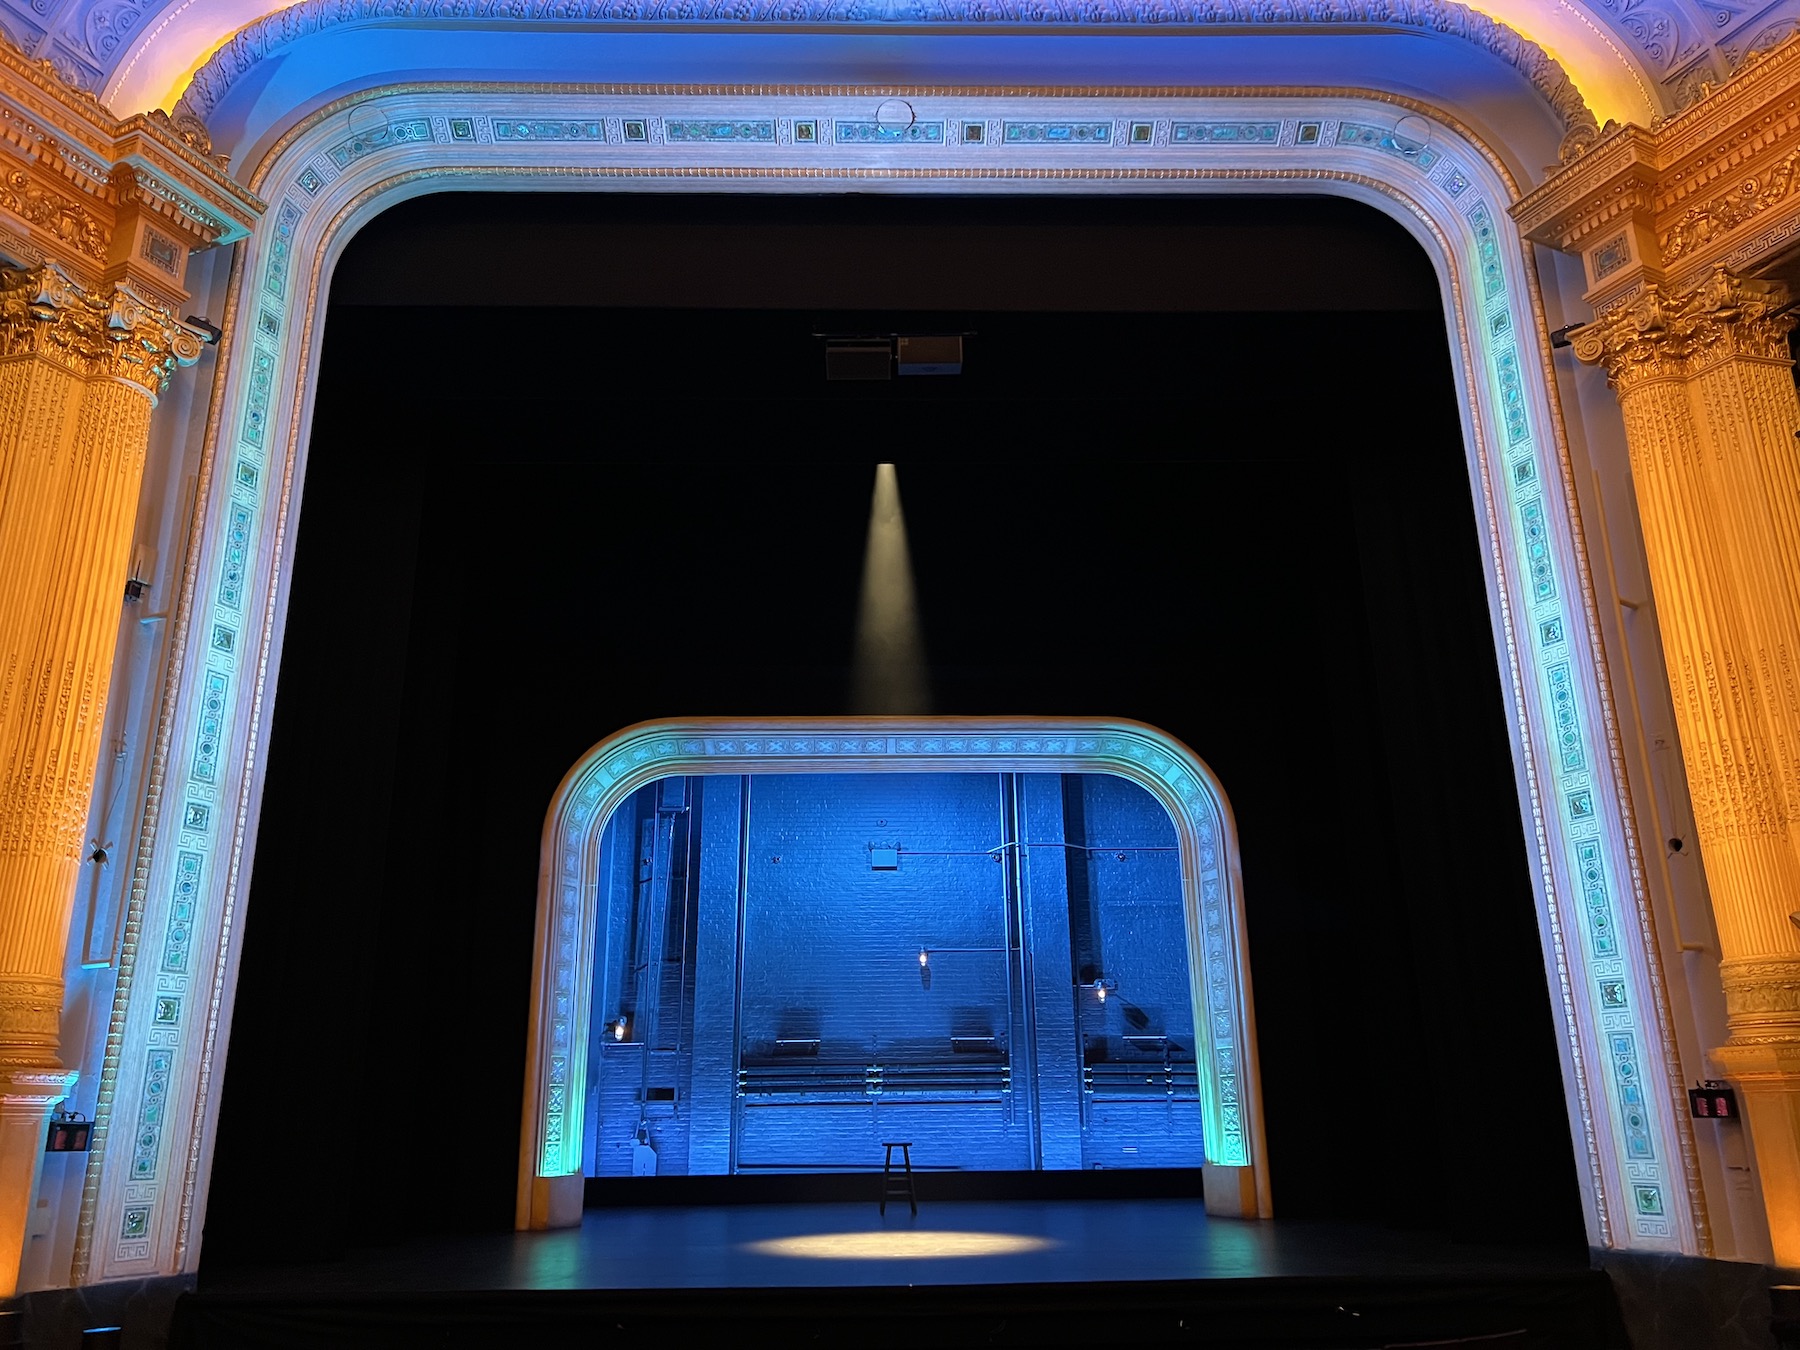 Photo 10 in 'JUST FOR US - Broadway' gallery showcasing lighting design by Mike Baldassari of Mike-O-Matic Industries LLC